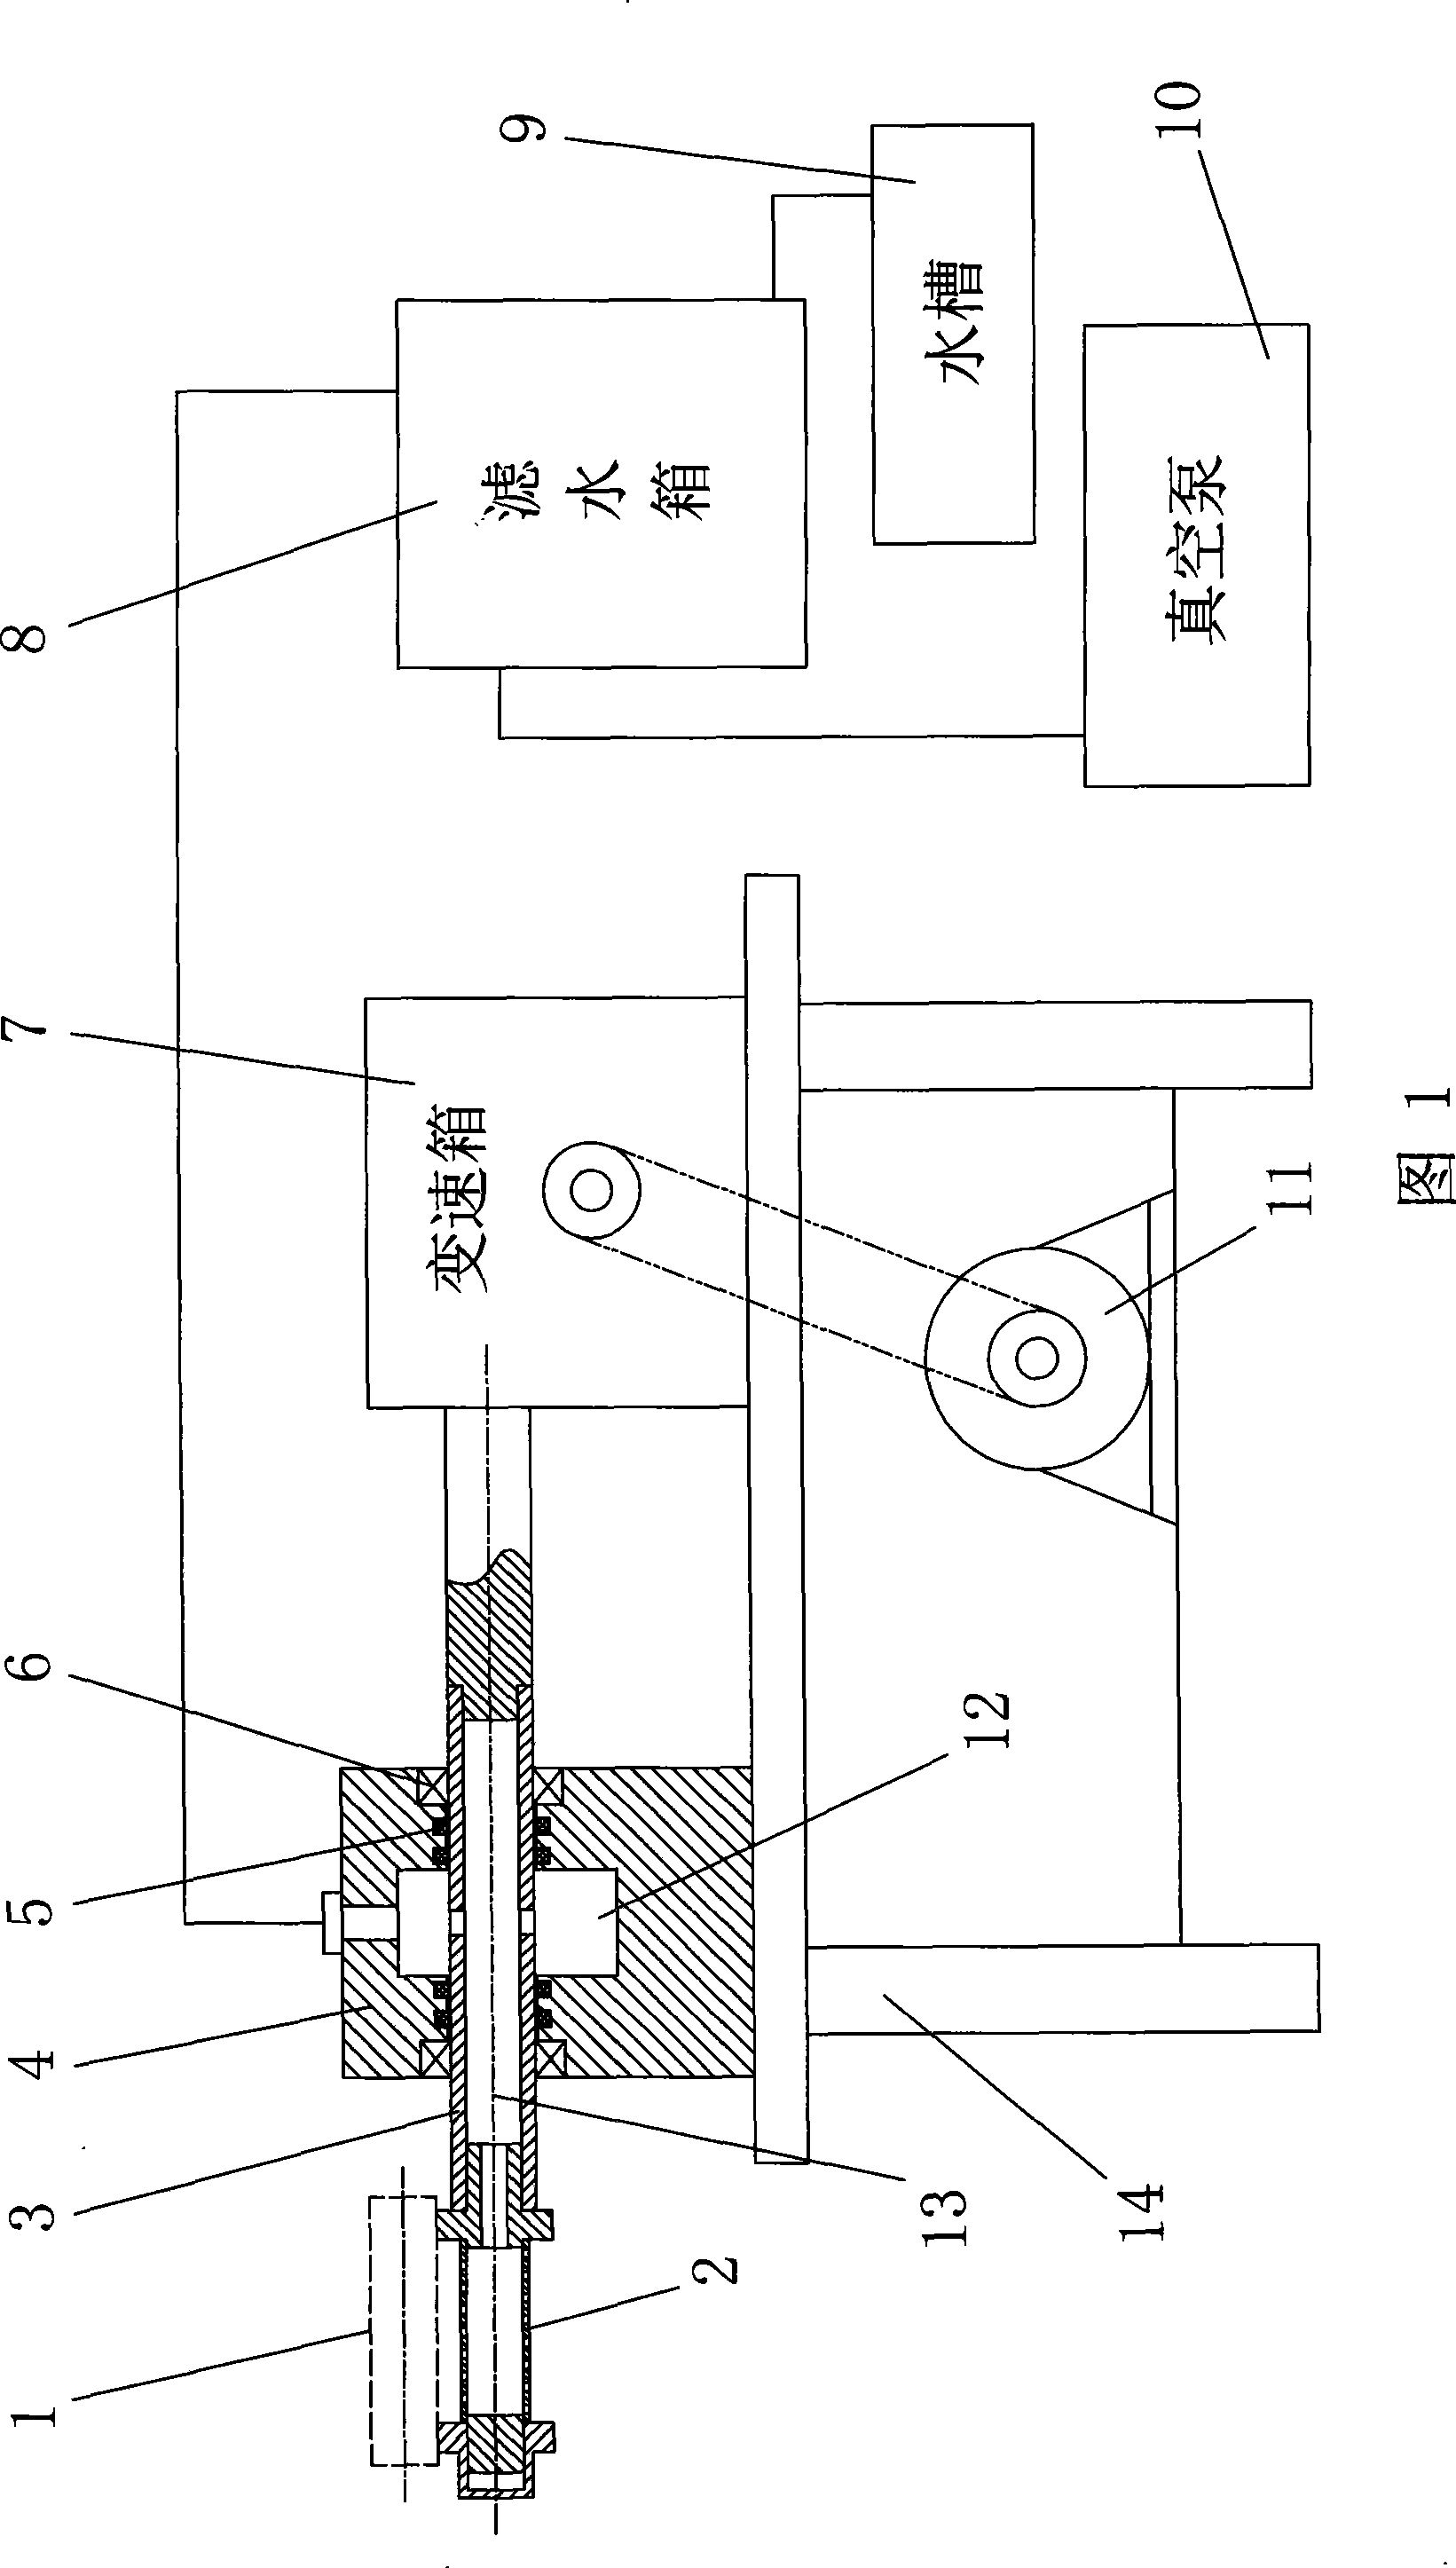 Flame-proof fibre product molding method and special equipment thereof